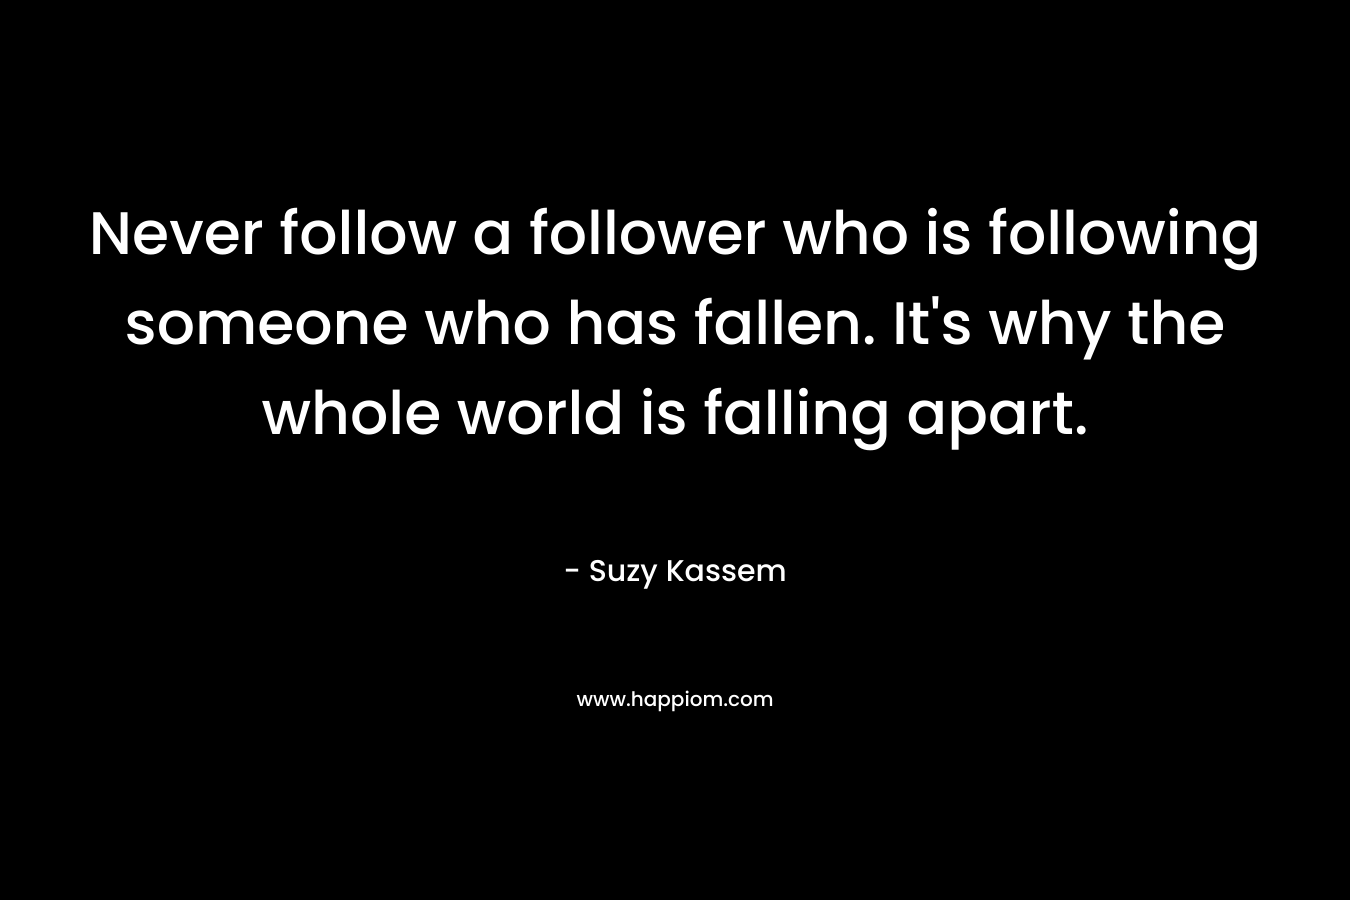 Never follow a follower who is following someone who has fallen. It’s why the whole world is falling apart. – Suzy Kassem